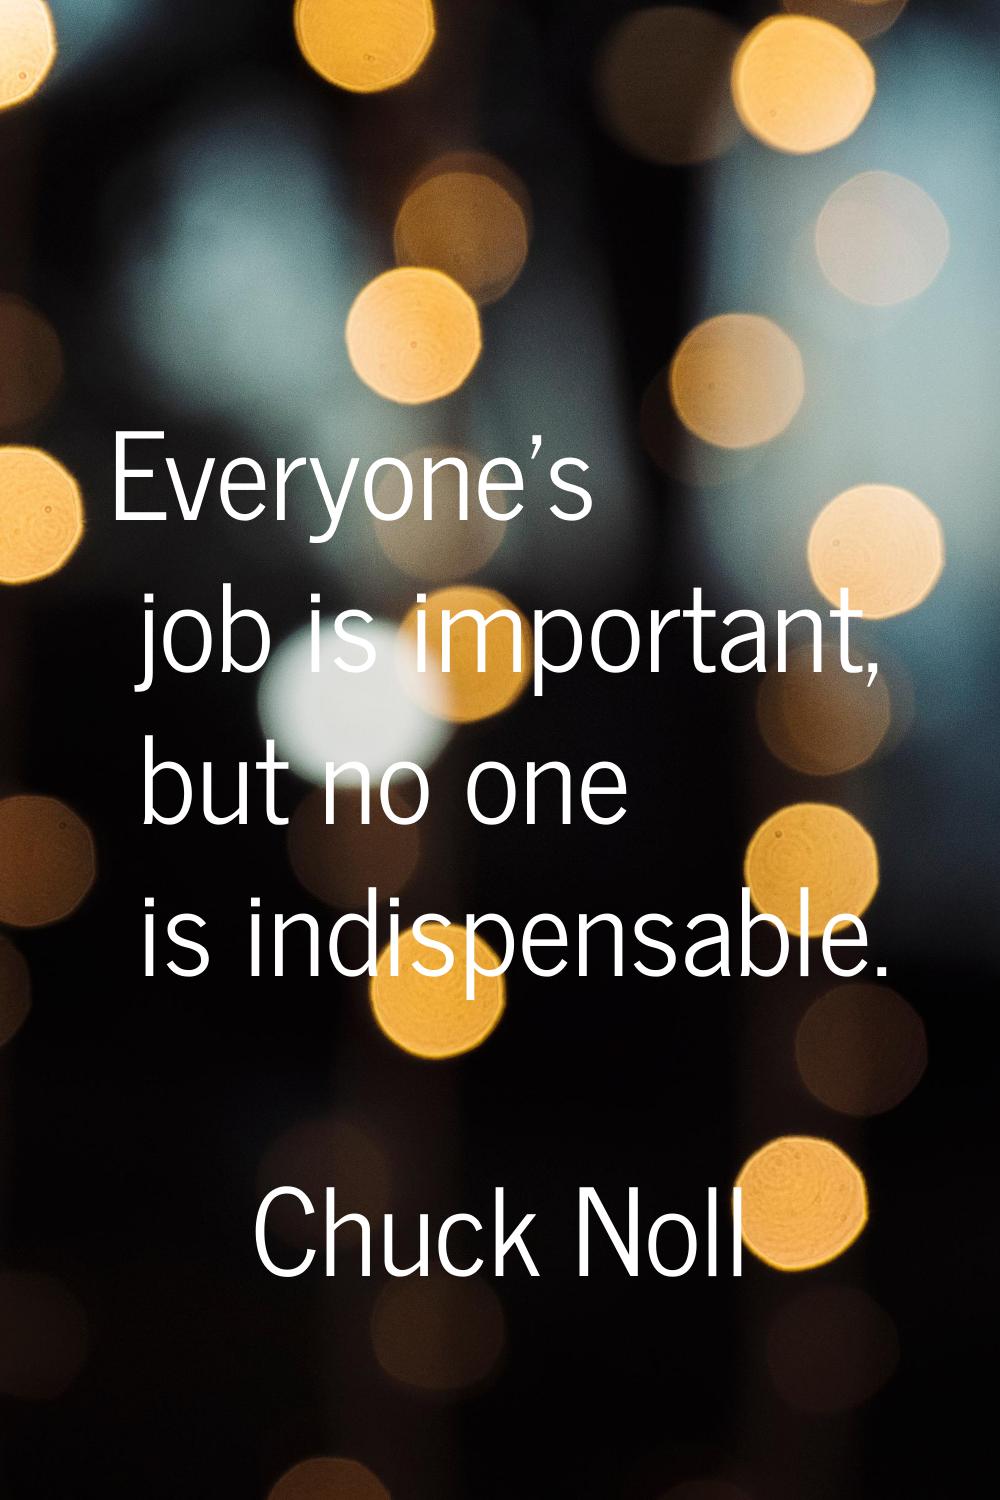 Everyone's job is important, but no one is indispensable.